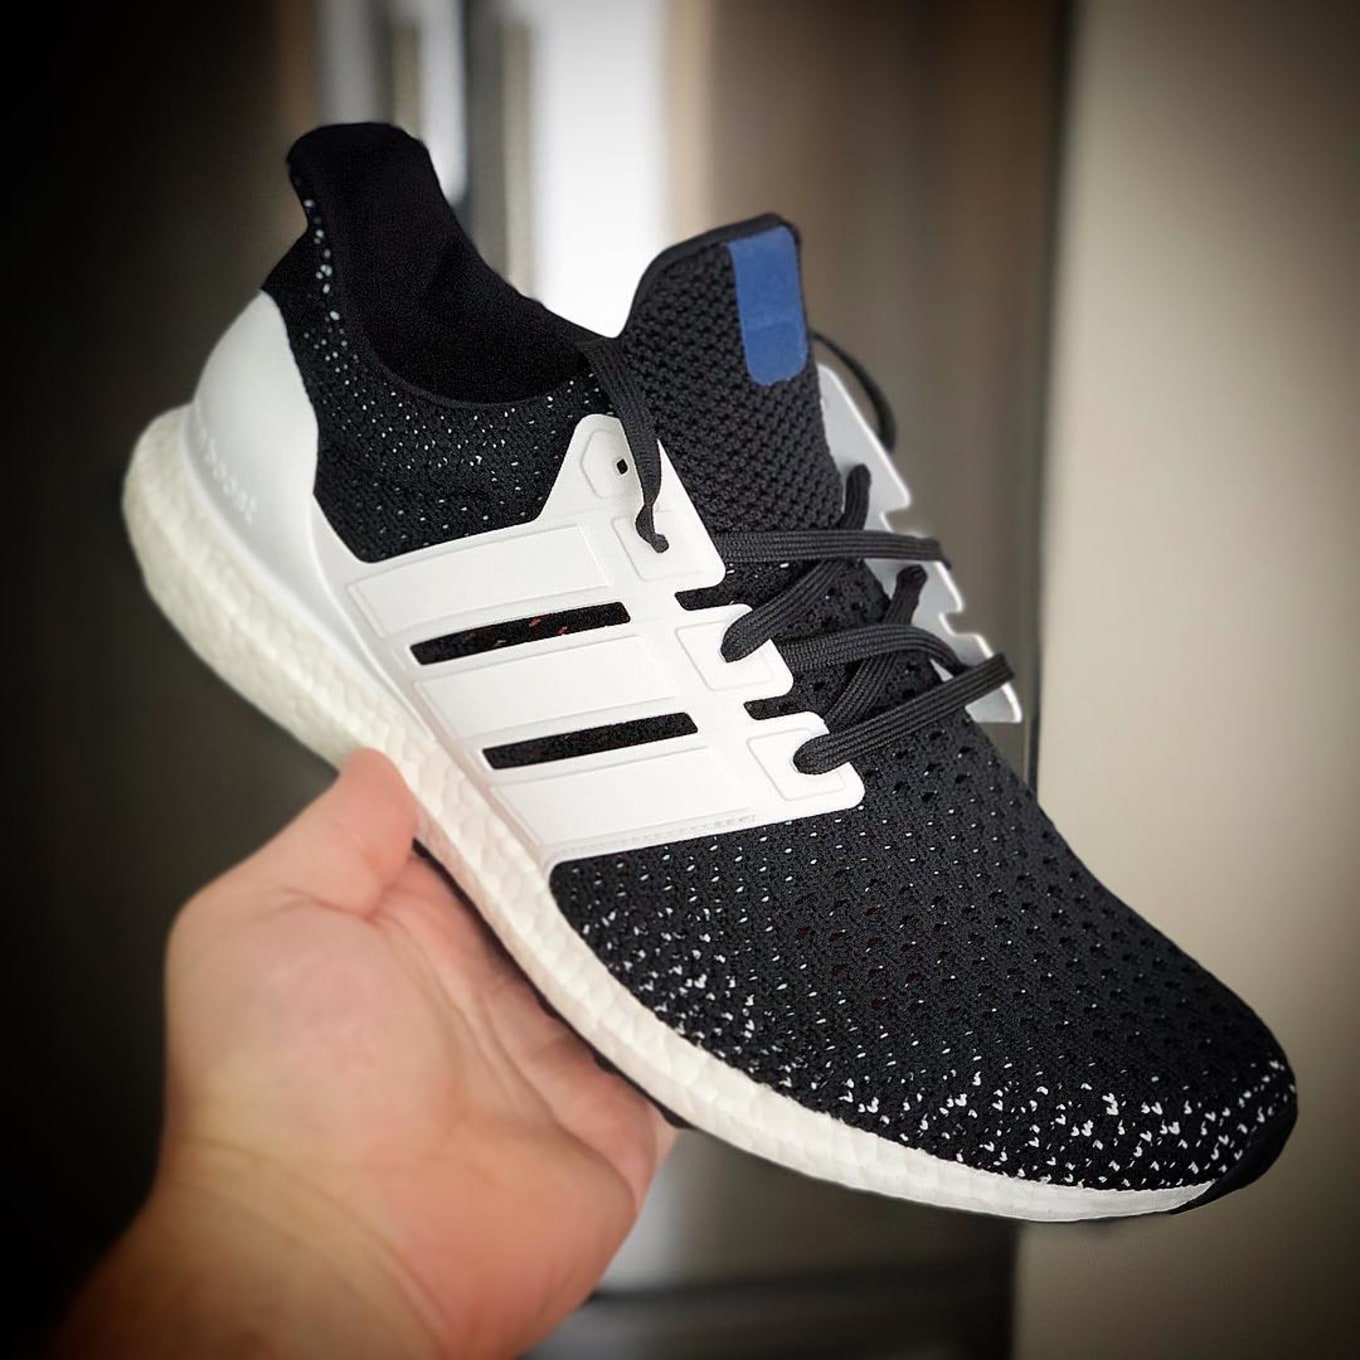 Arena marriage biography Miadidas Ultra Boost Clima Store, 55% OFF | lavarockrestaurant.com